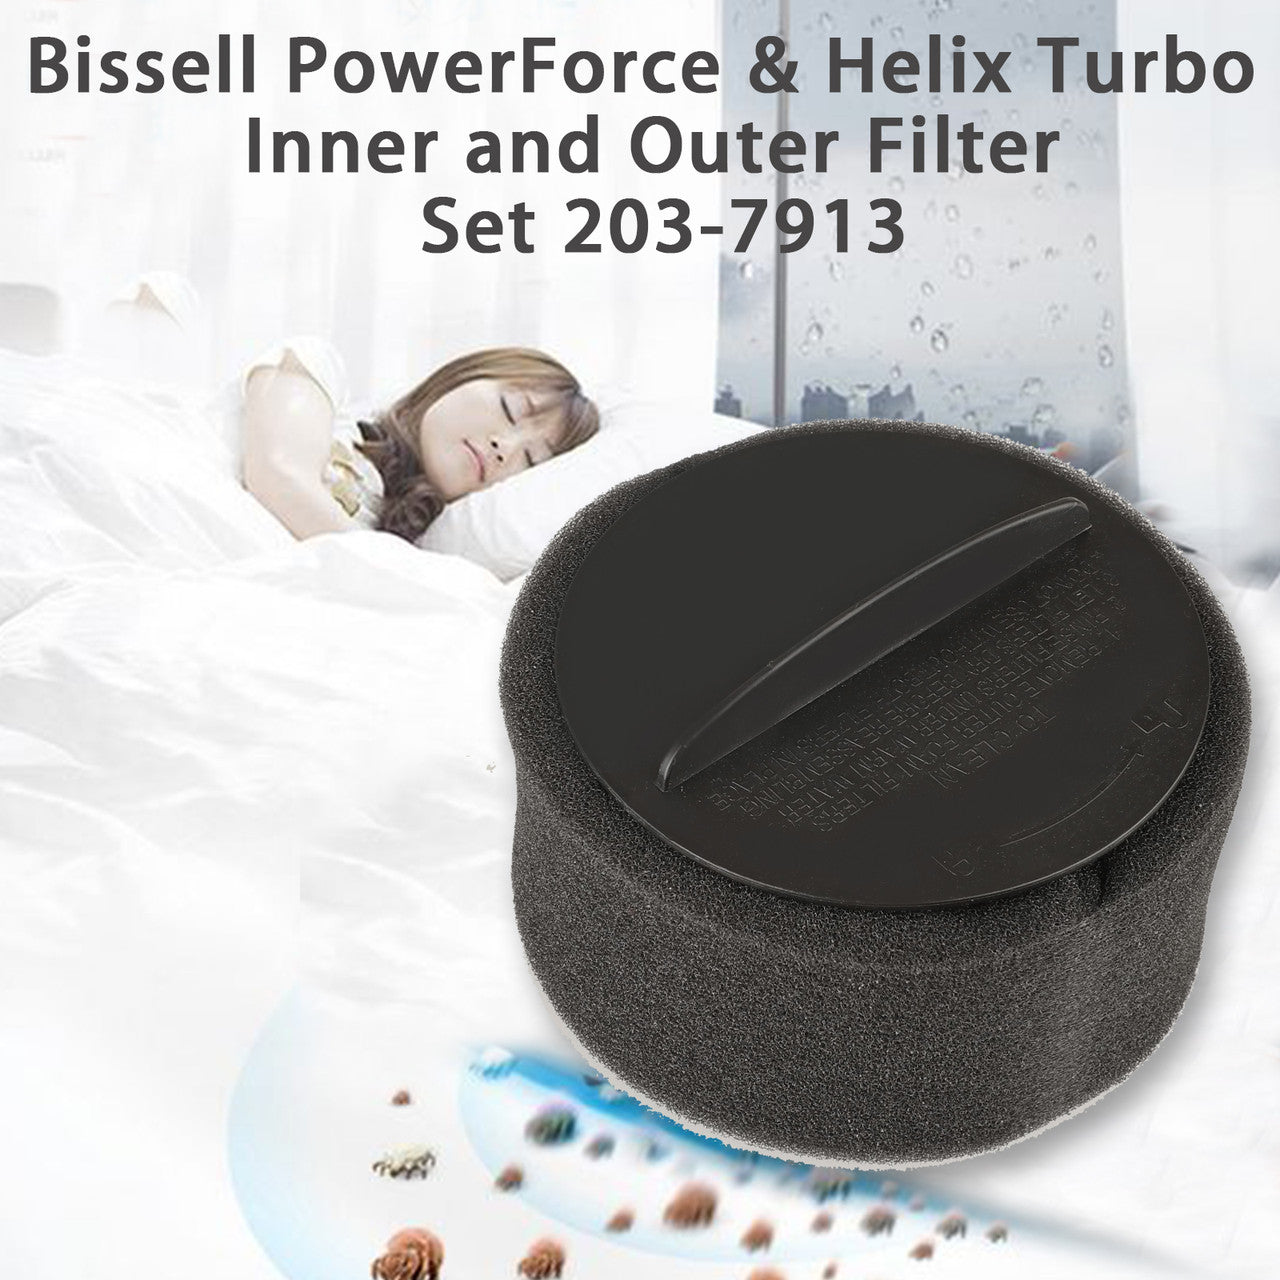 Replacement Compatible with Bissell PowerForce & Helix Turbo Inner and Outer Filter, 203-7913 Circular Filters Fit for Bissell 203-7913, 203-2587, 203-1464, 203-1192, 203-1183, 203-8161 73K1